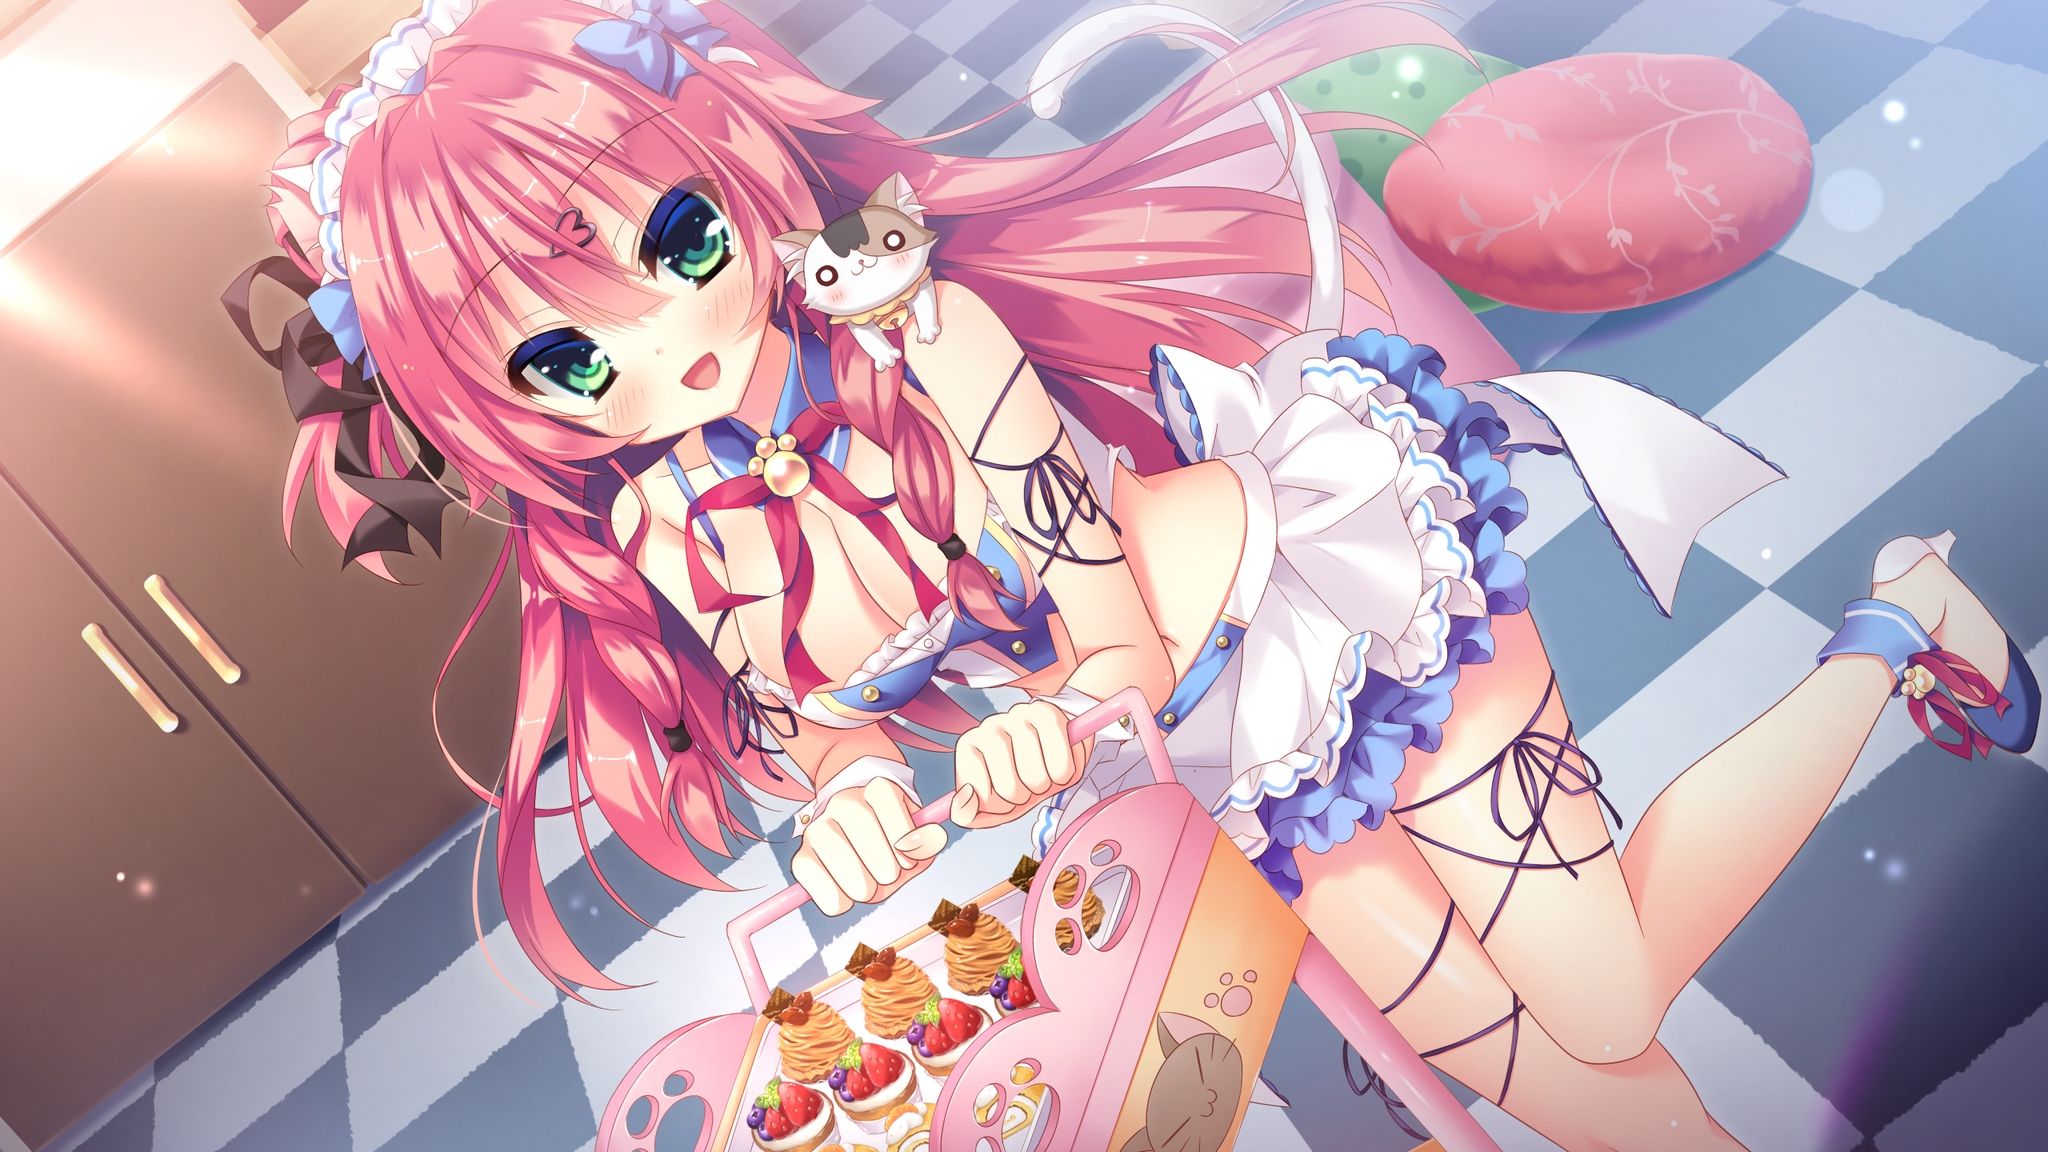 Dalmatians in Nya I'm ☆ served ALA mode! [PC18 forbidden eroge HCG] erotic wallpapers and pictures part 2 1